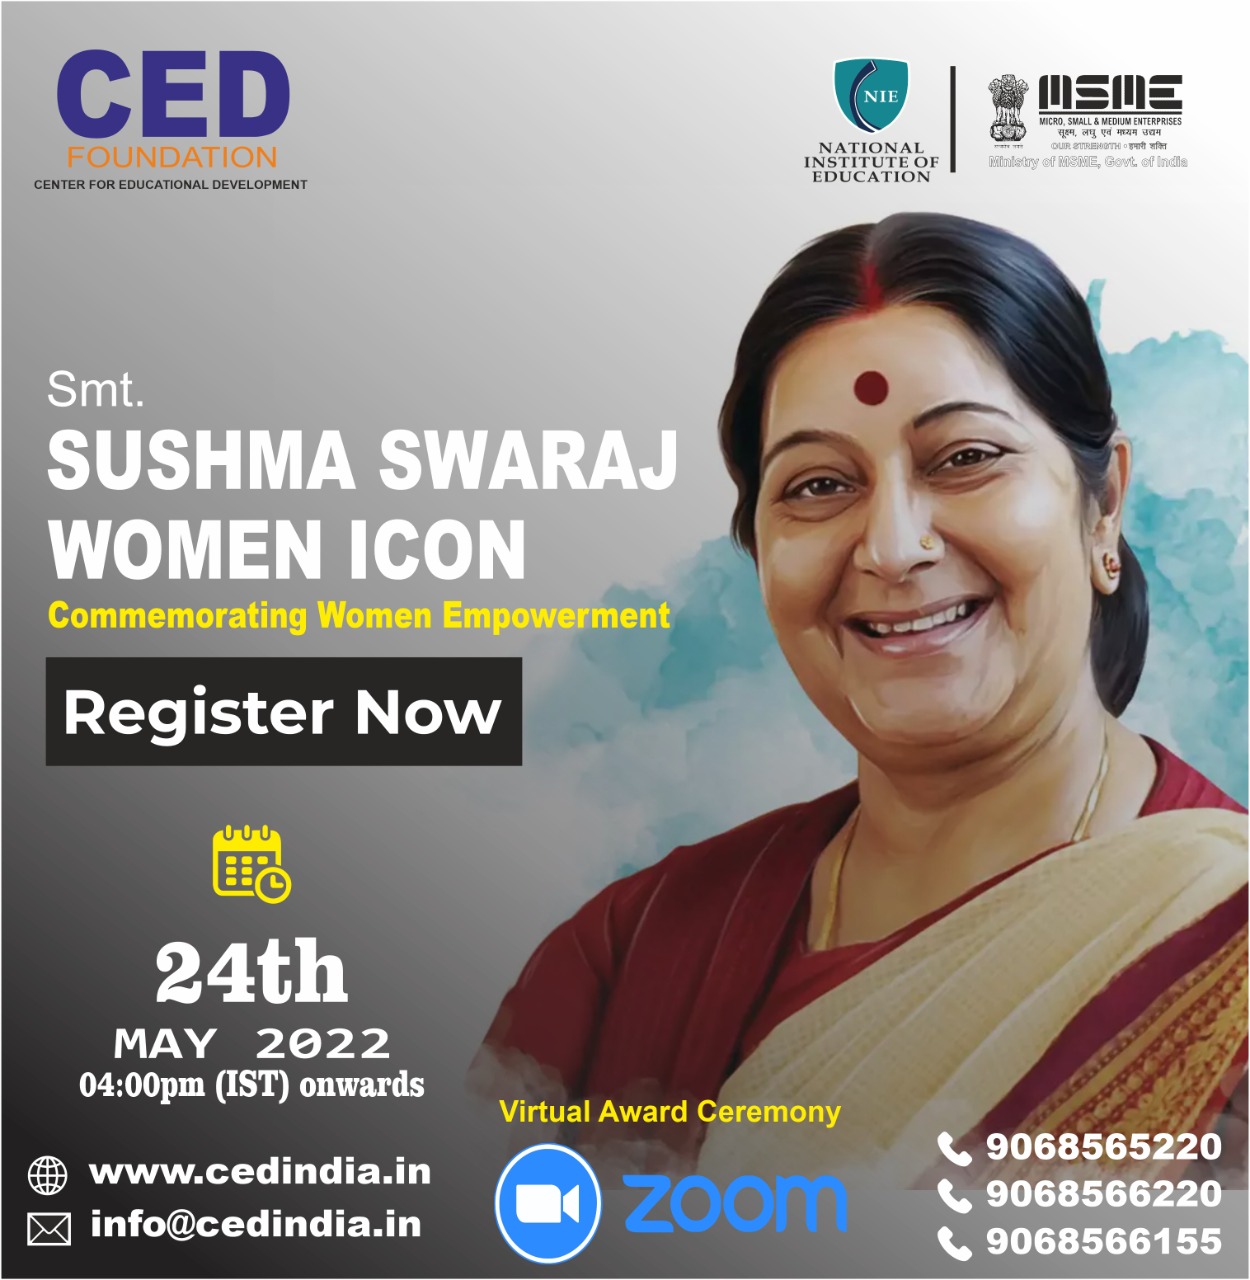 “SUSHMA SWARAJ WOMEN ICON AWARD”Organised by CED Foundation to Celebrate the Success of Empowering Women 2022